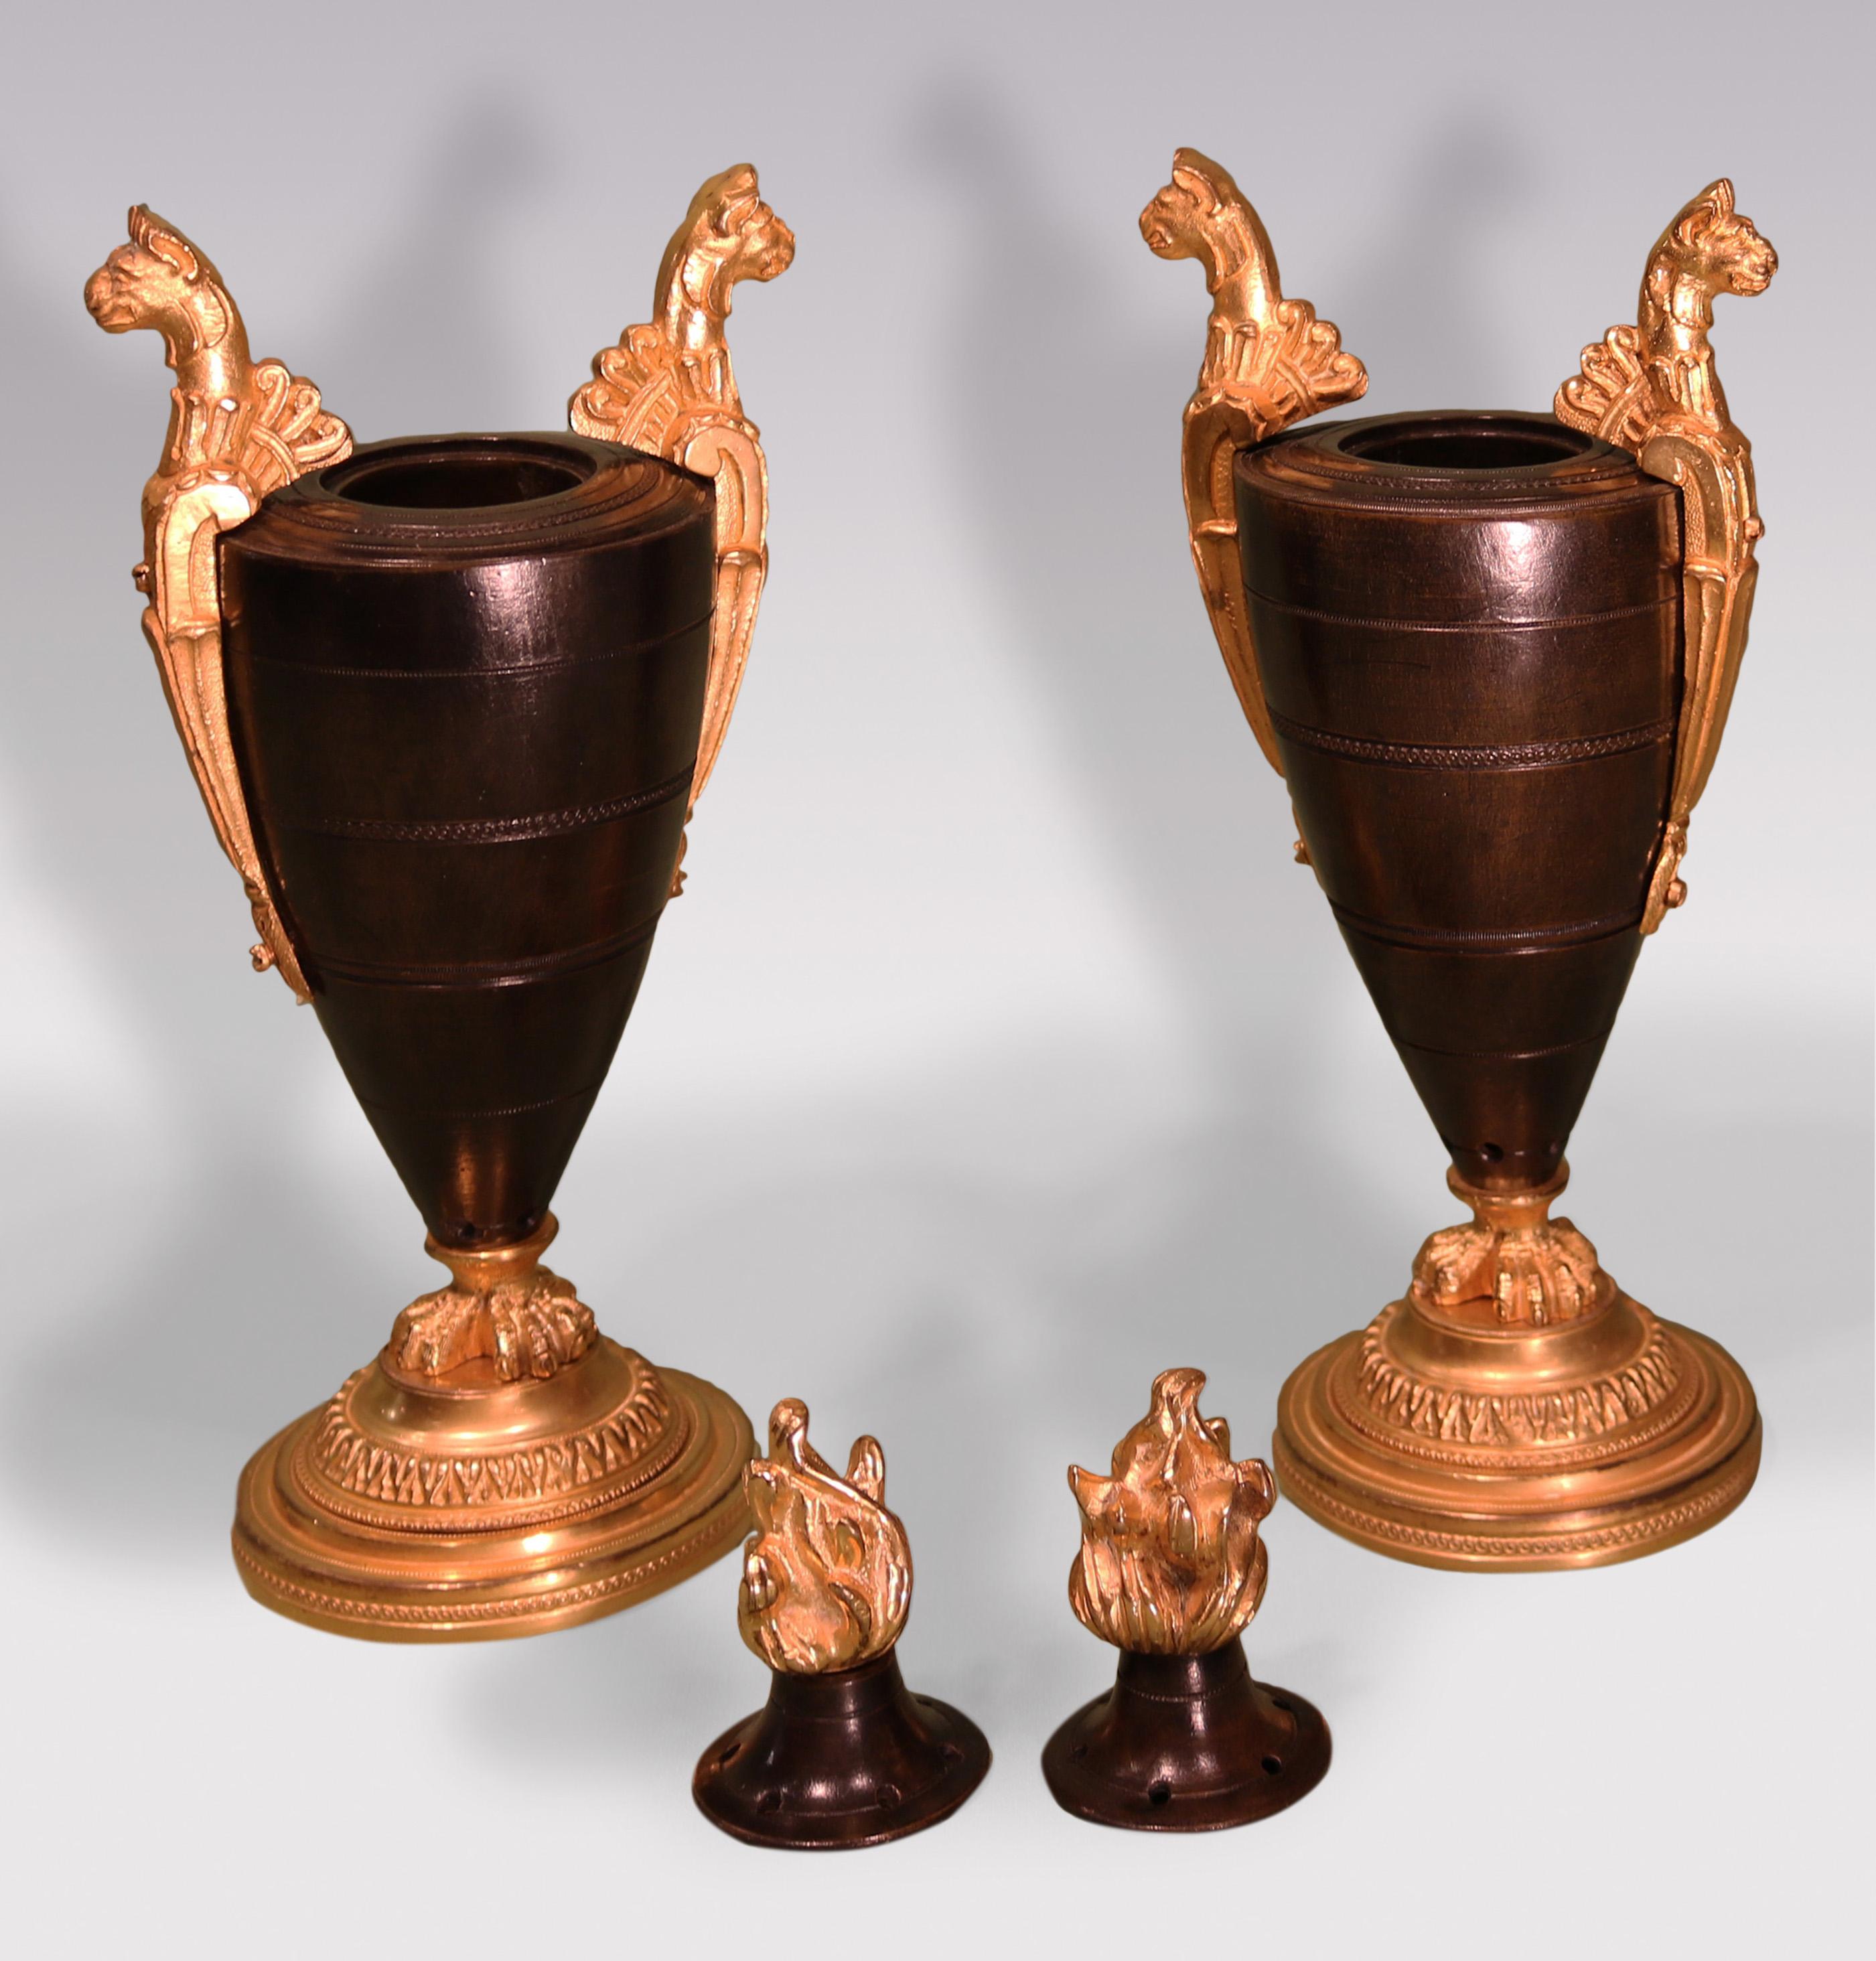 An unusual Pair of early 19th Century bronze & ormolu Parfumiers in the form of urns with flame lids flanked by anthemion leopard handles, raised on triple feet ending on engine-turned circular bases.